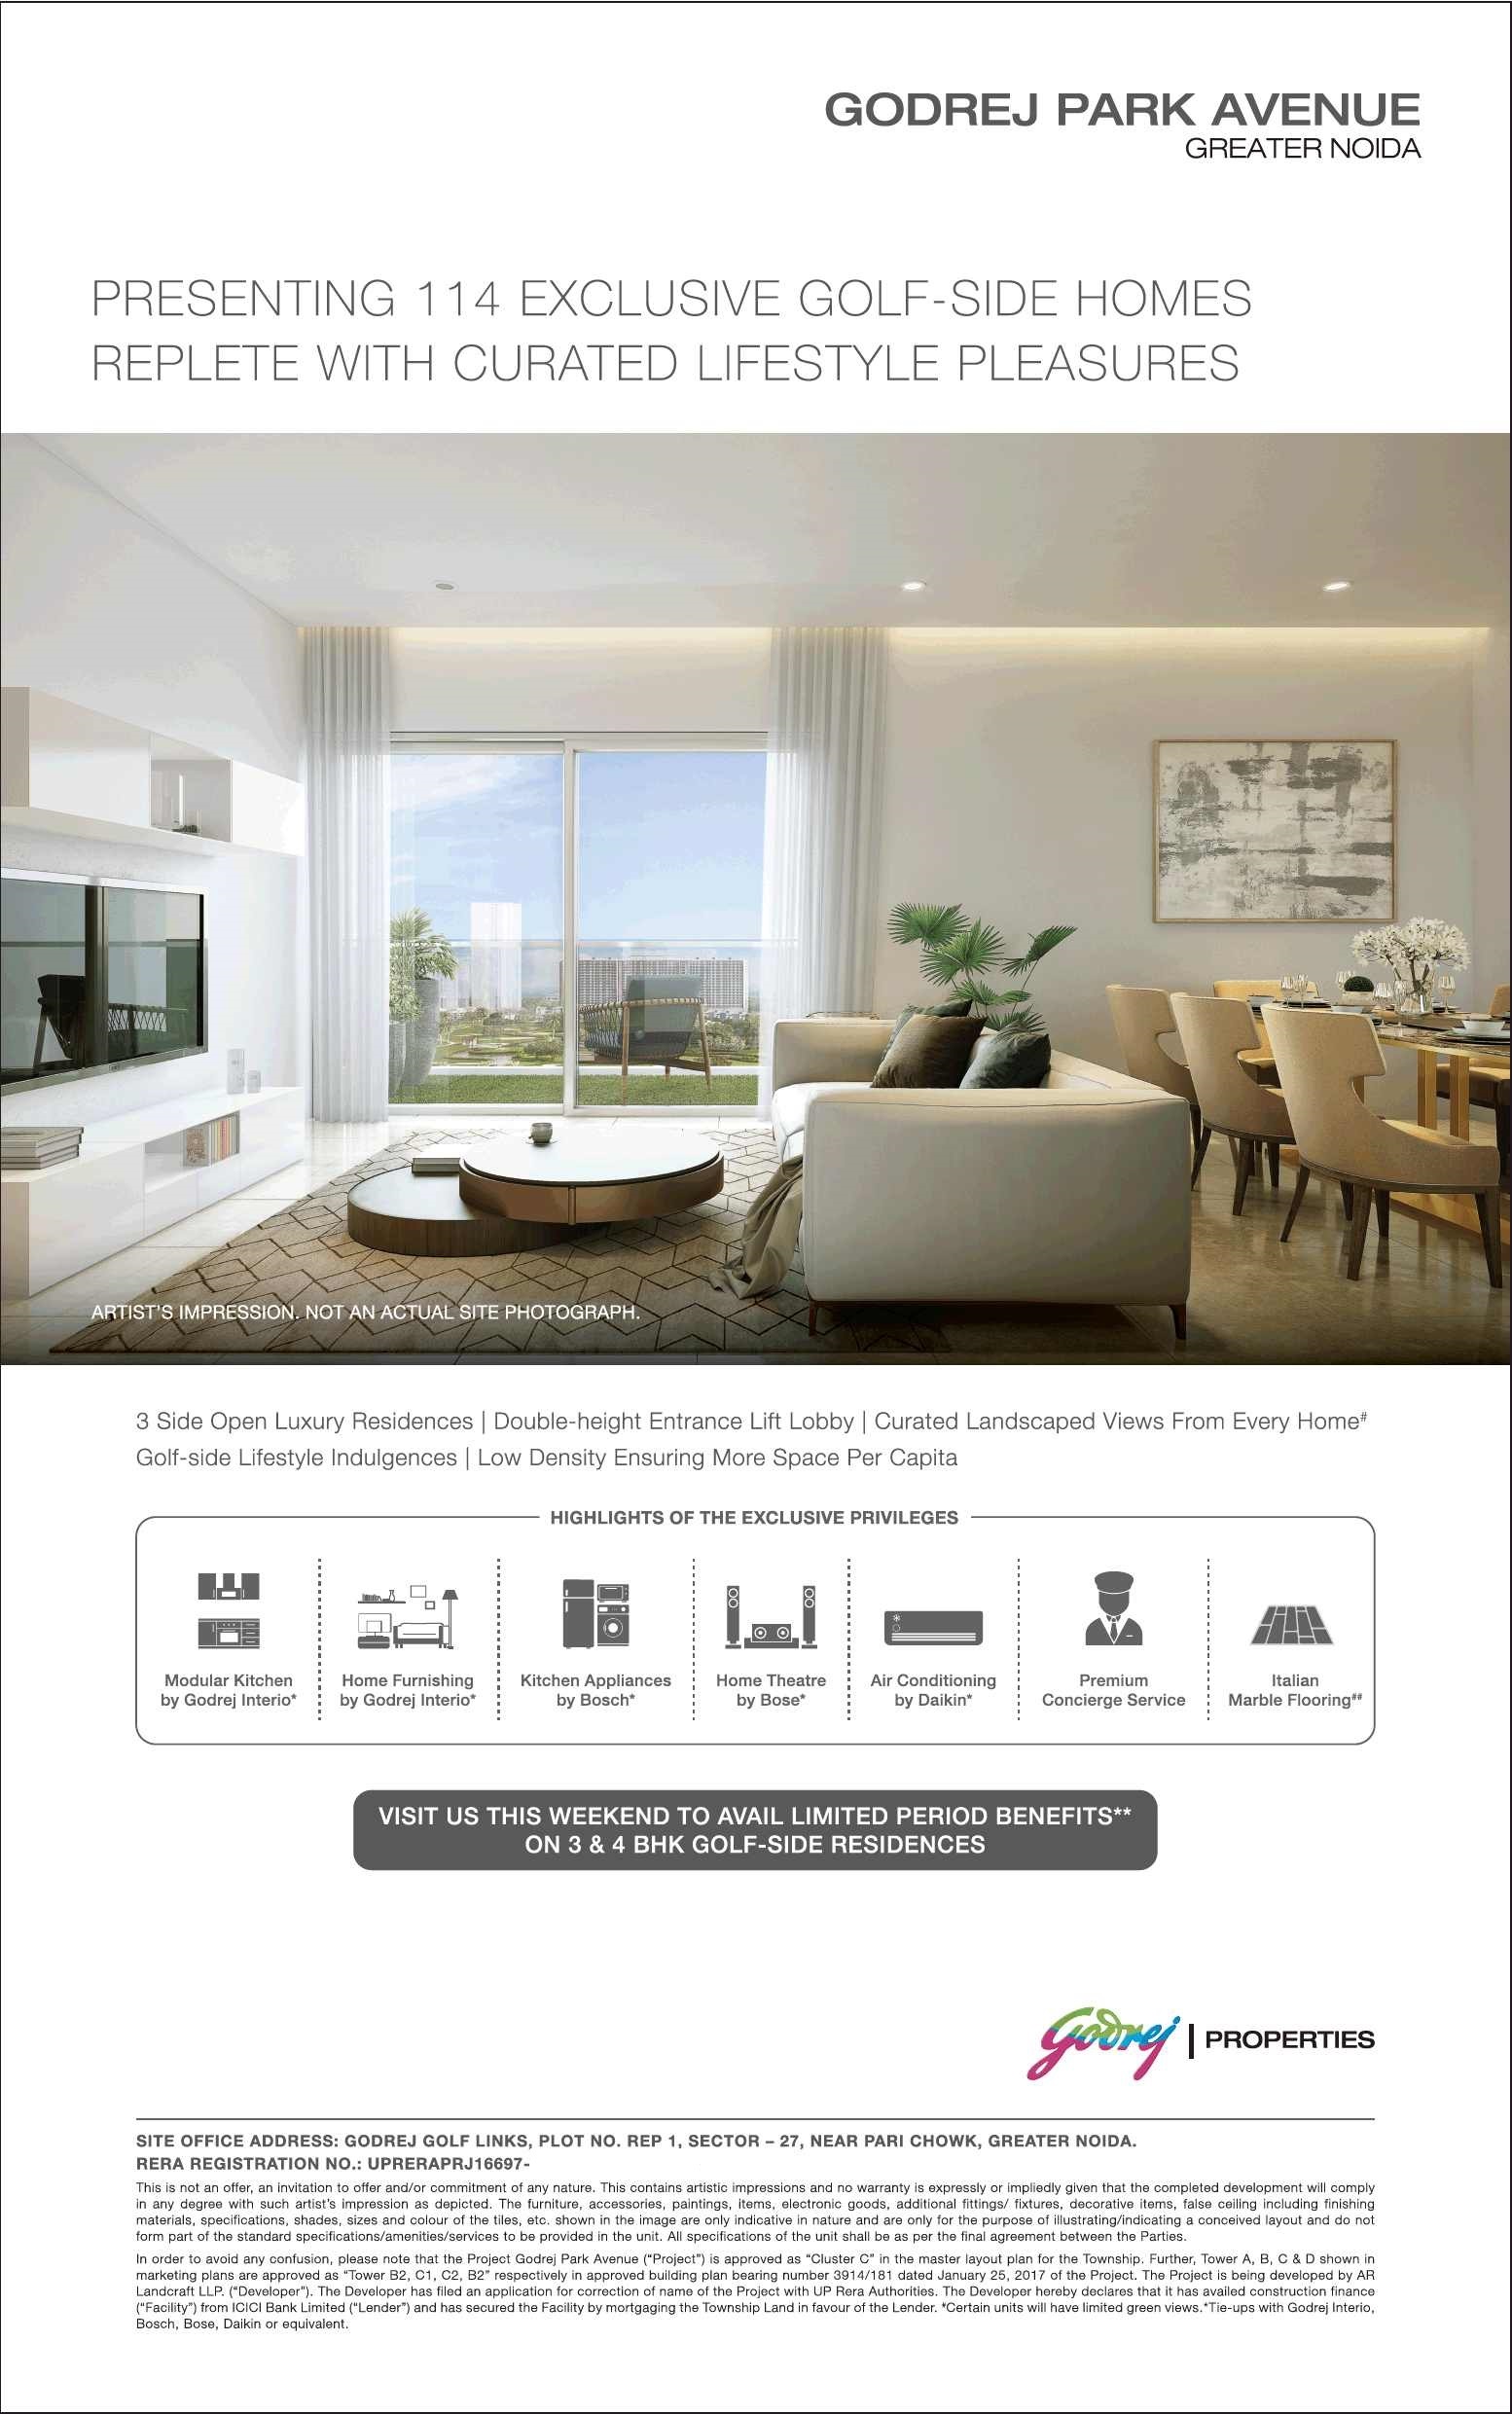 Avail 3 side open luxury residencies at Godrej Park Avenue in Greater Noida Update